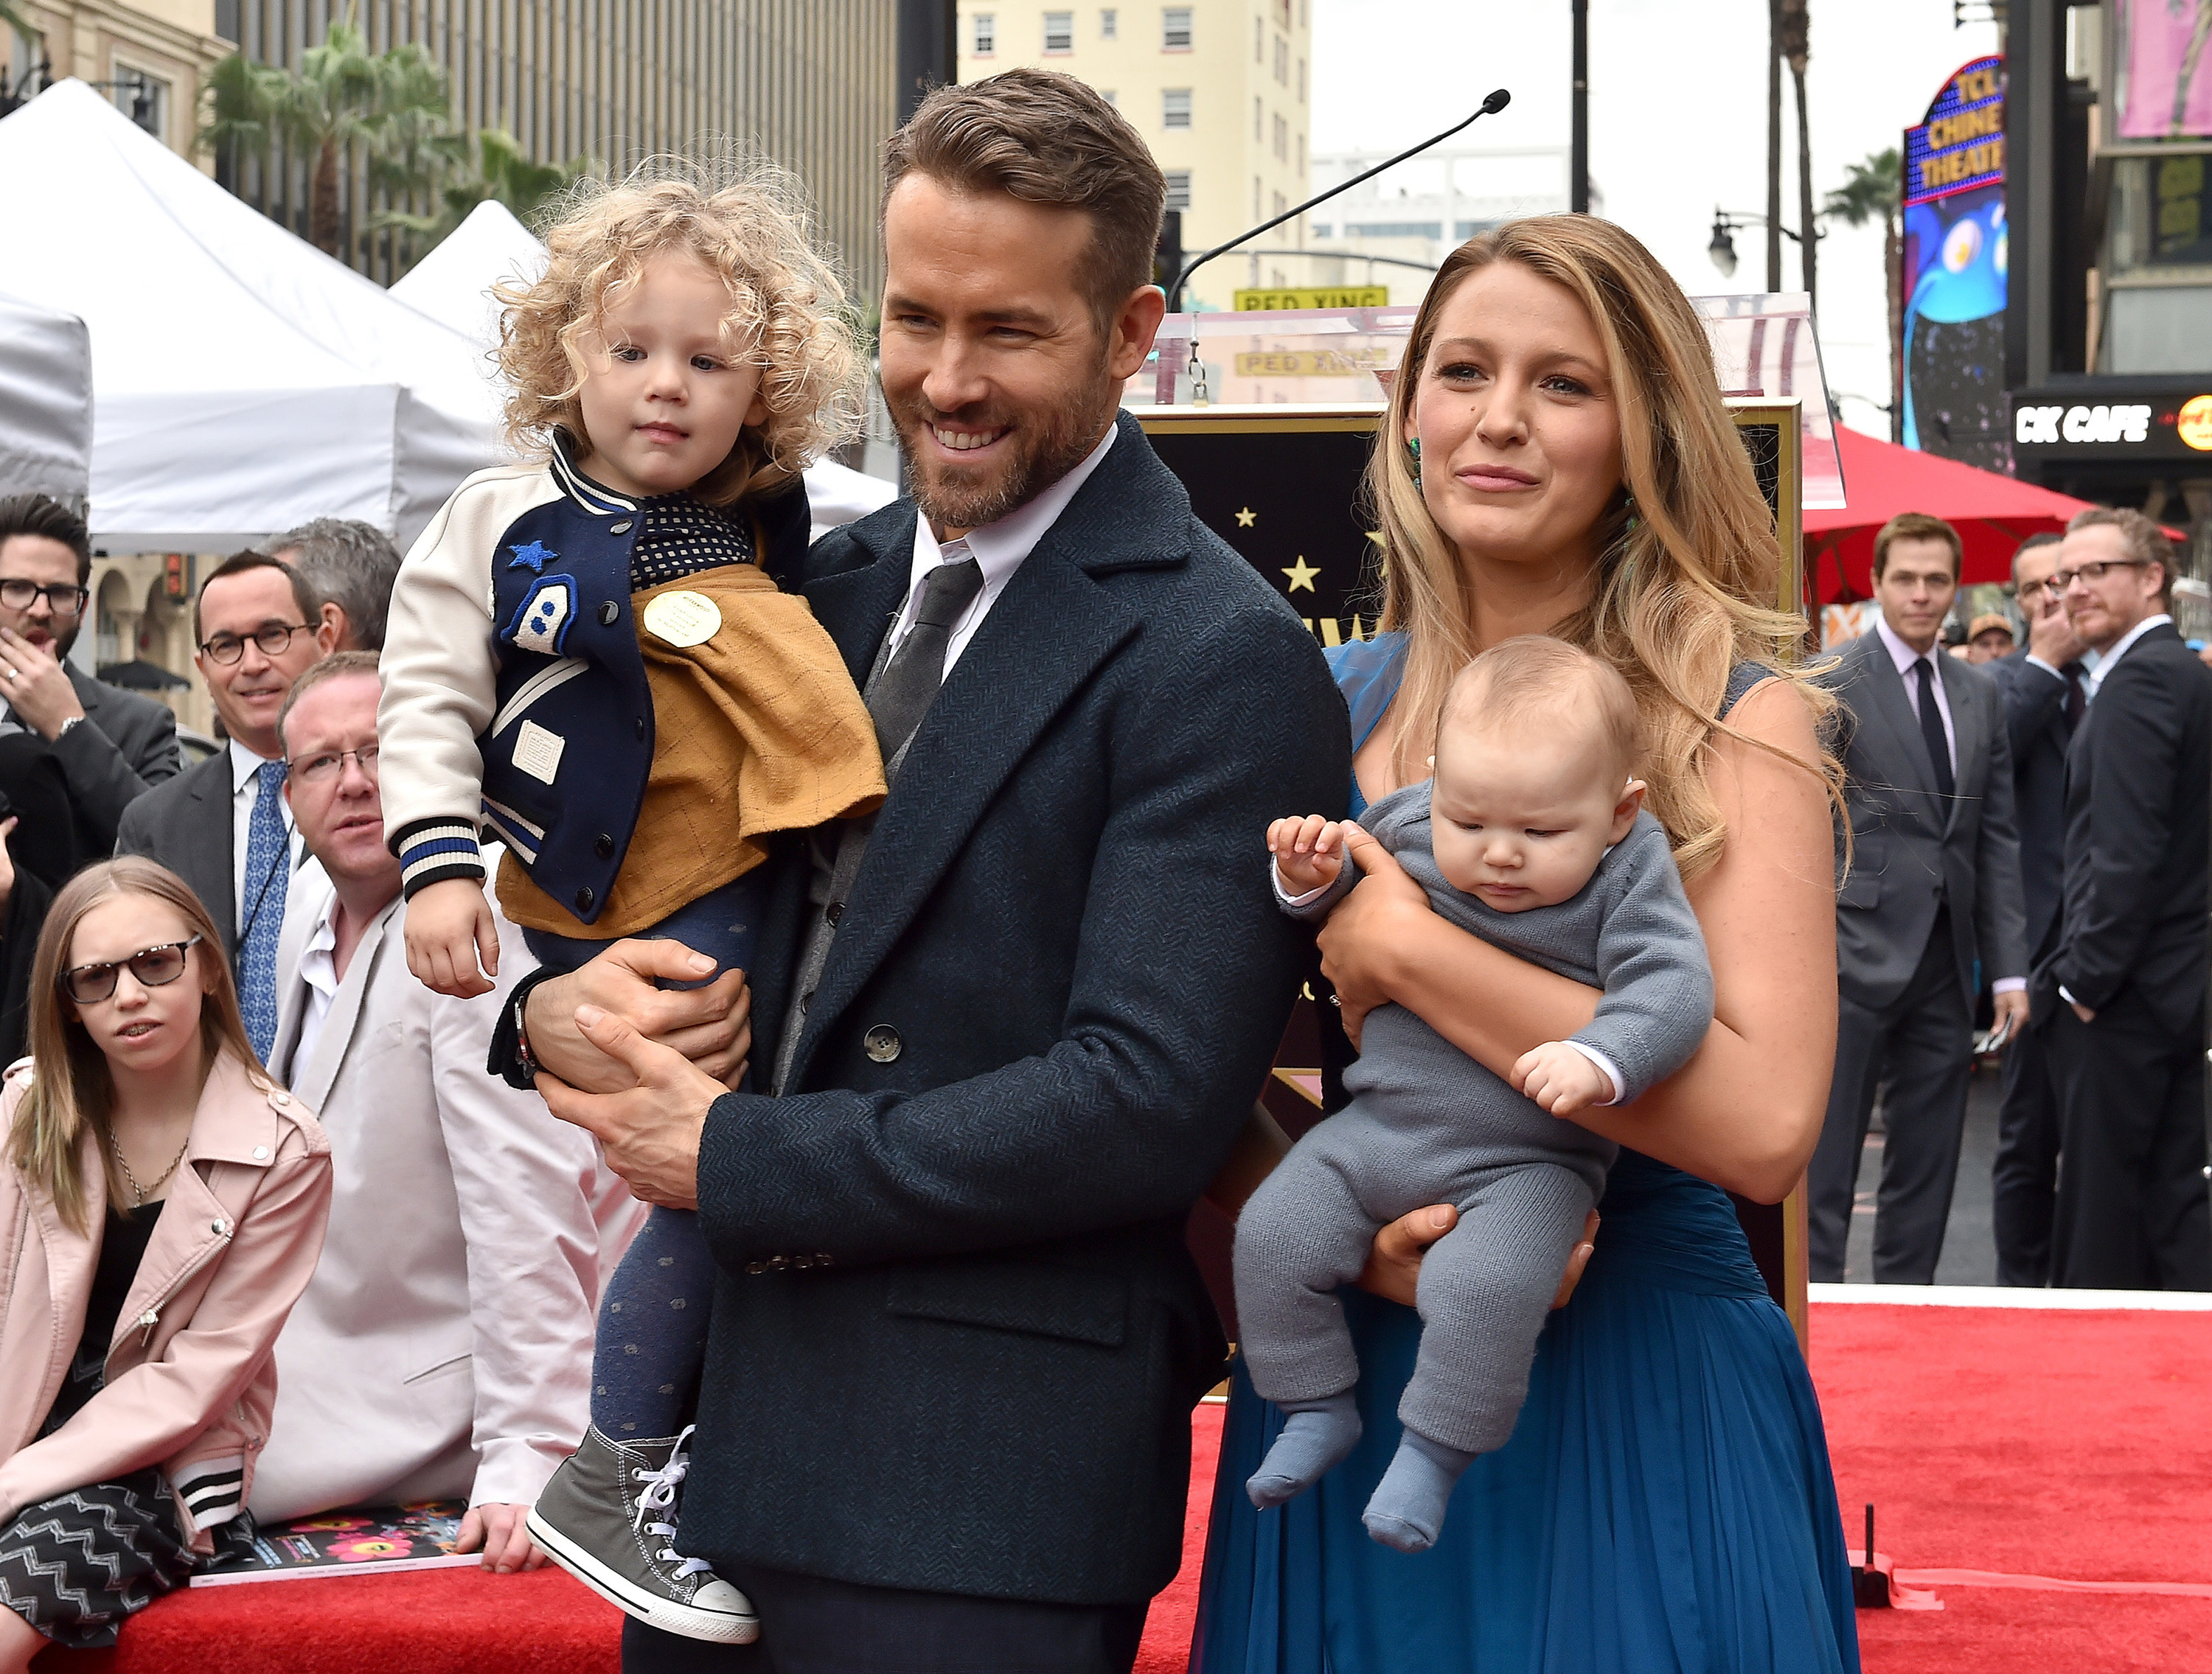 Ryan and Blake hold two of their children on the red carpet